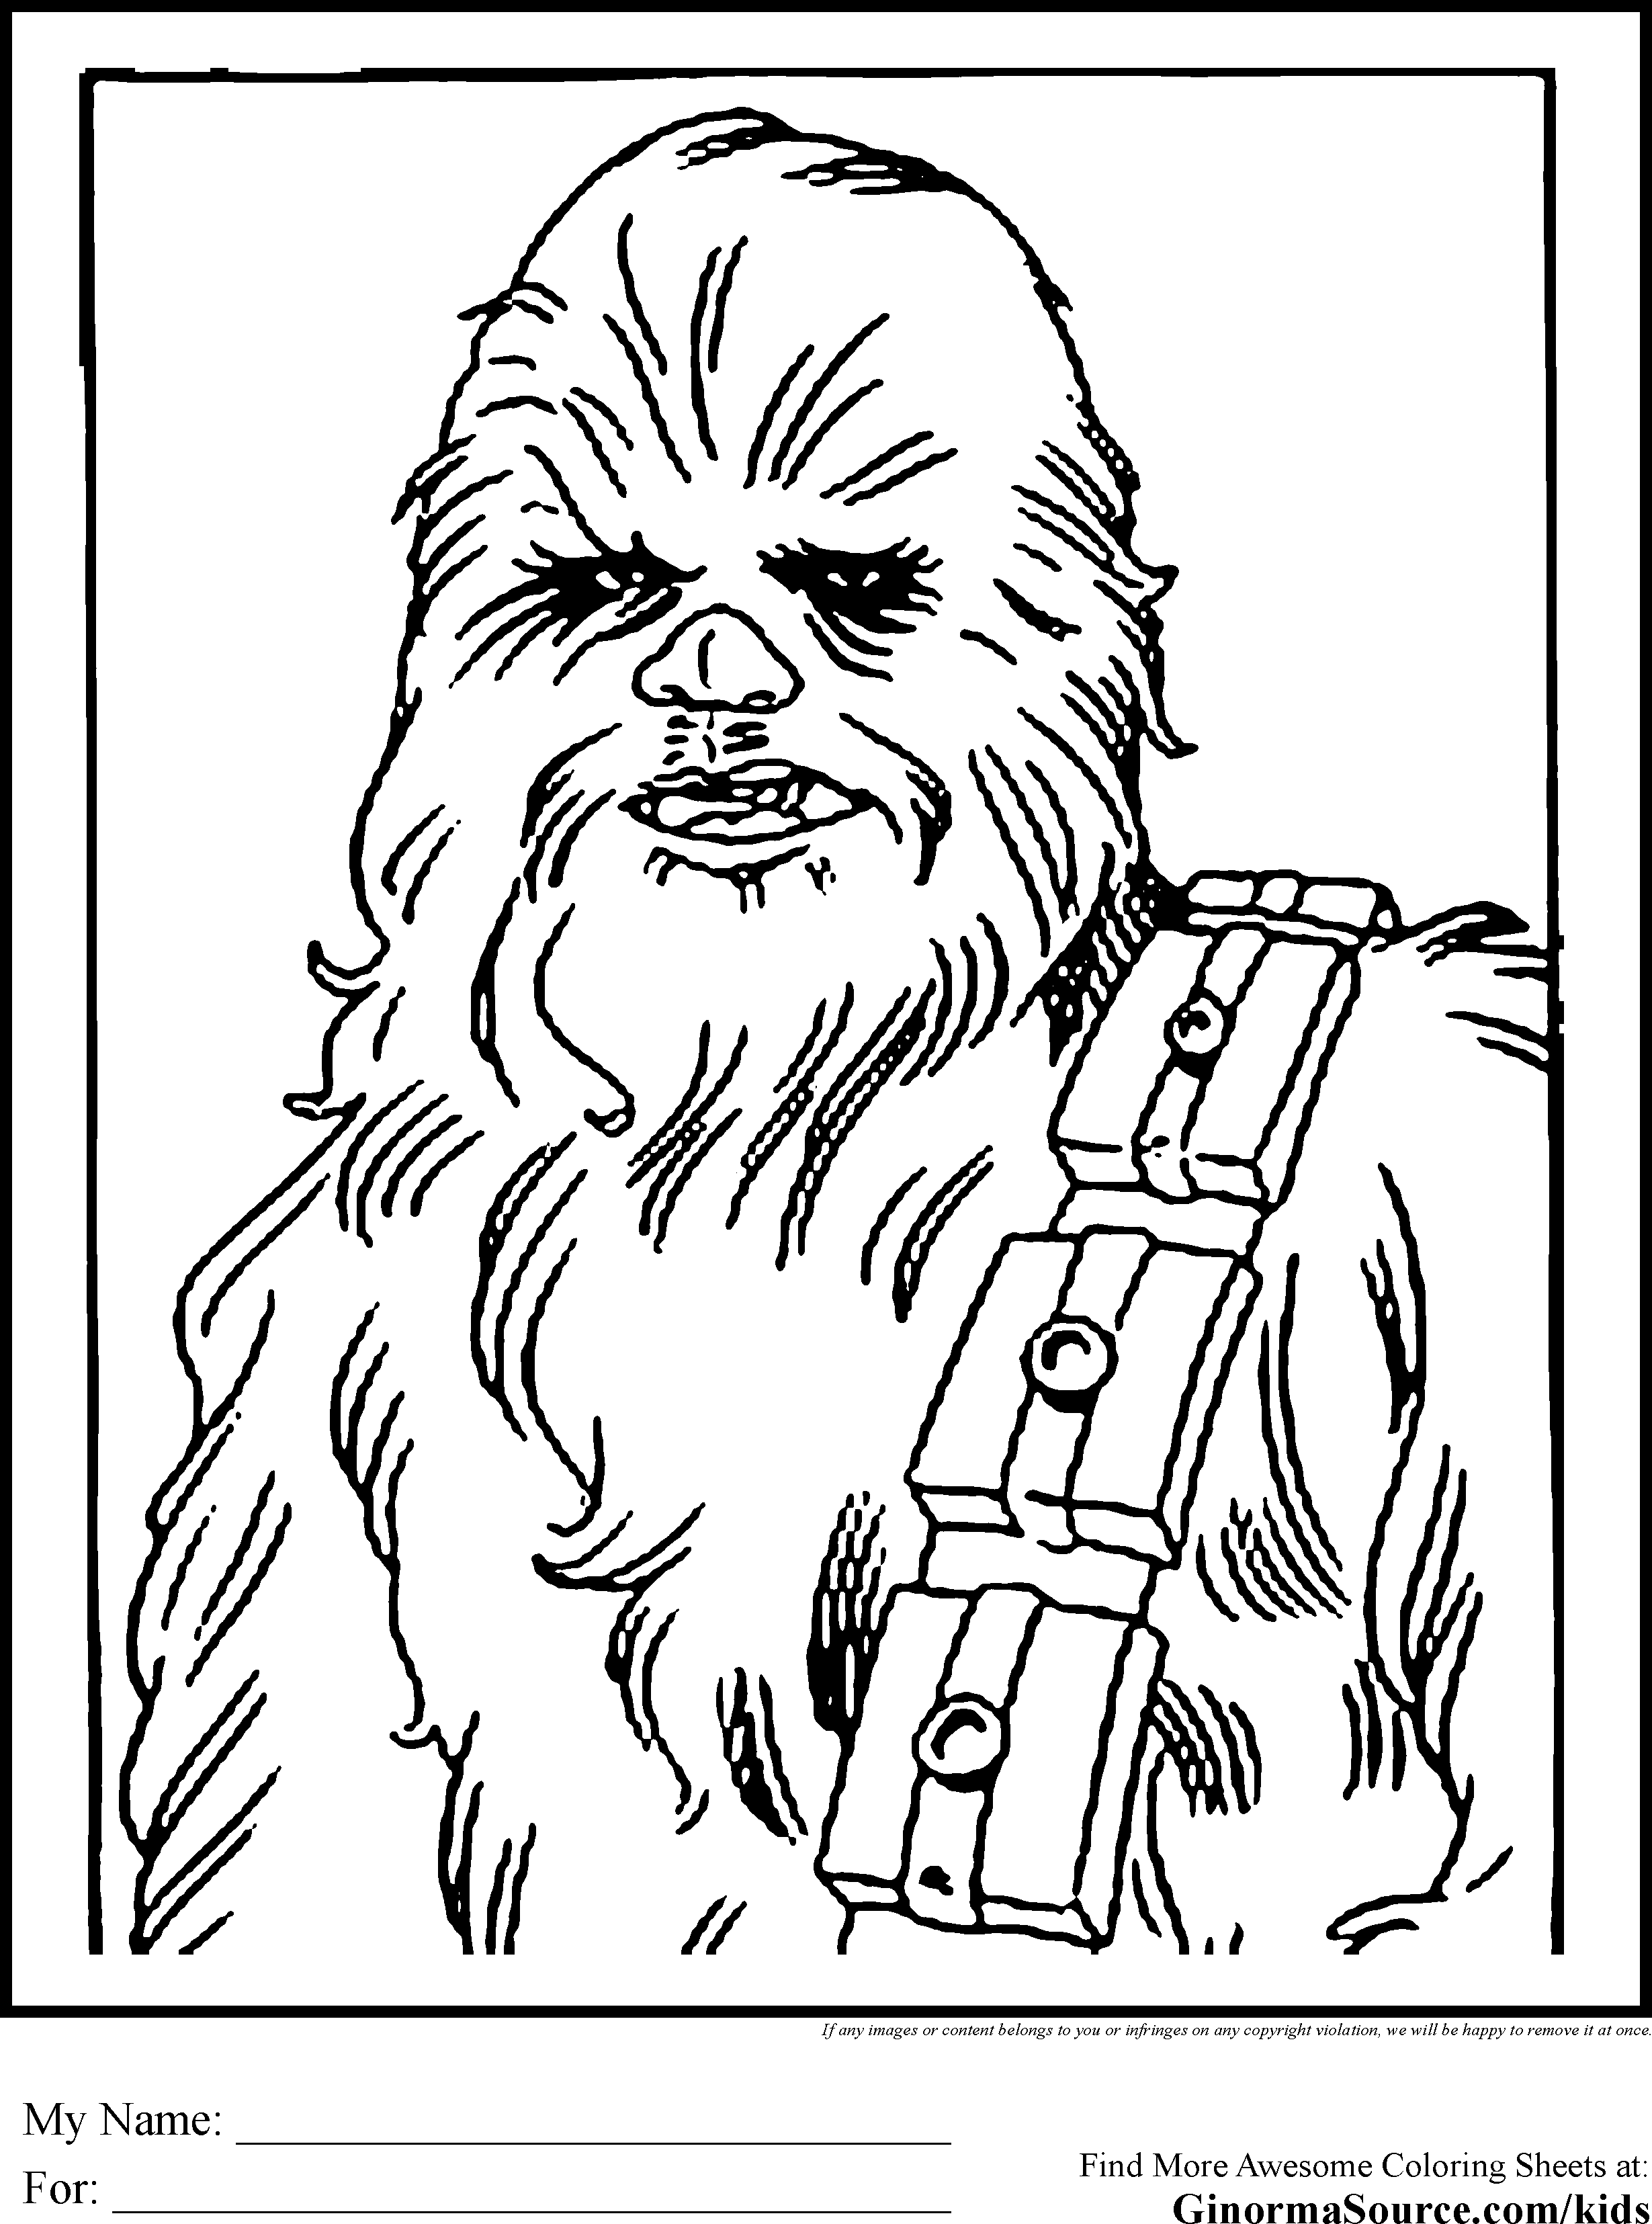 free-chewbacca-coloring-page-download-free-chewbacca-coloring-page-png